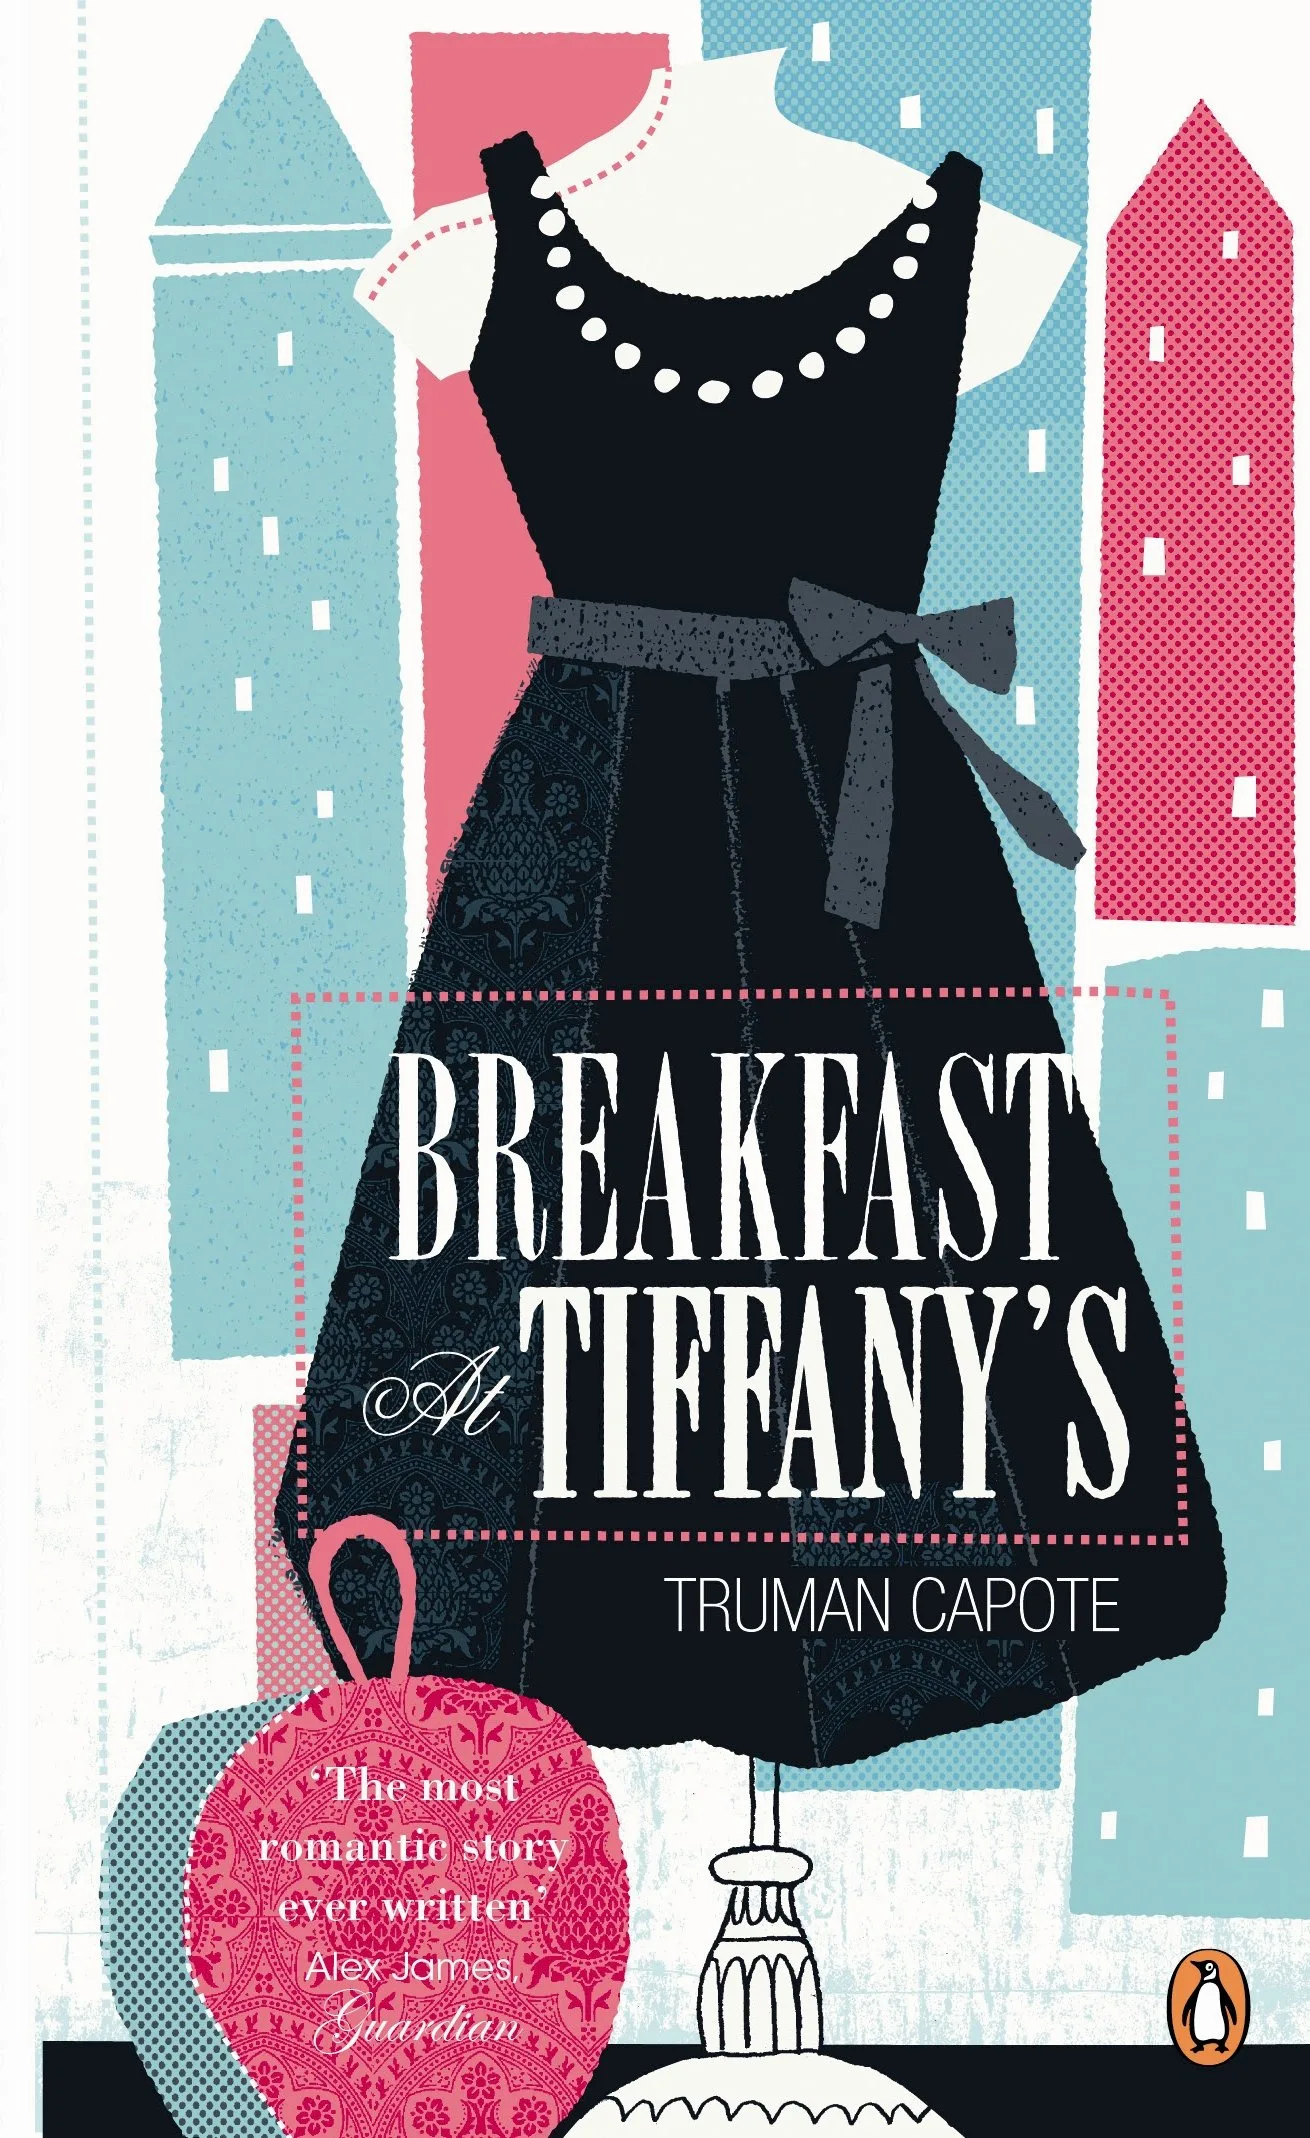 Best Books about New York City, Breakfast at Tiffany's